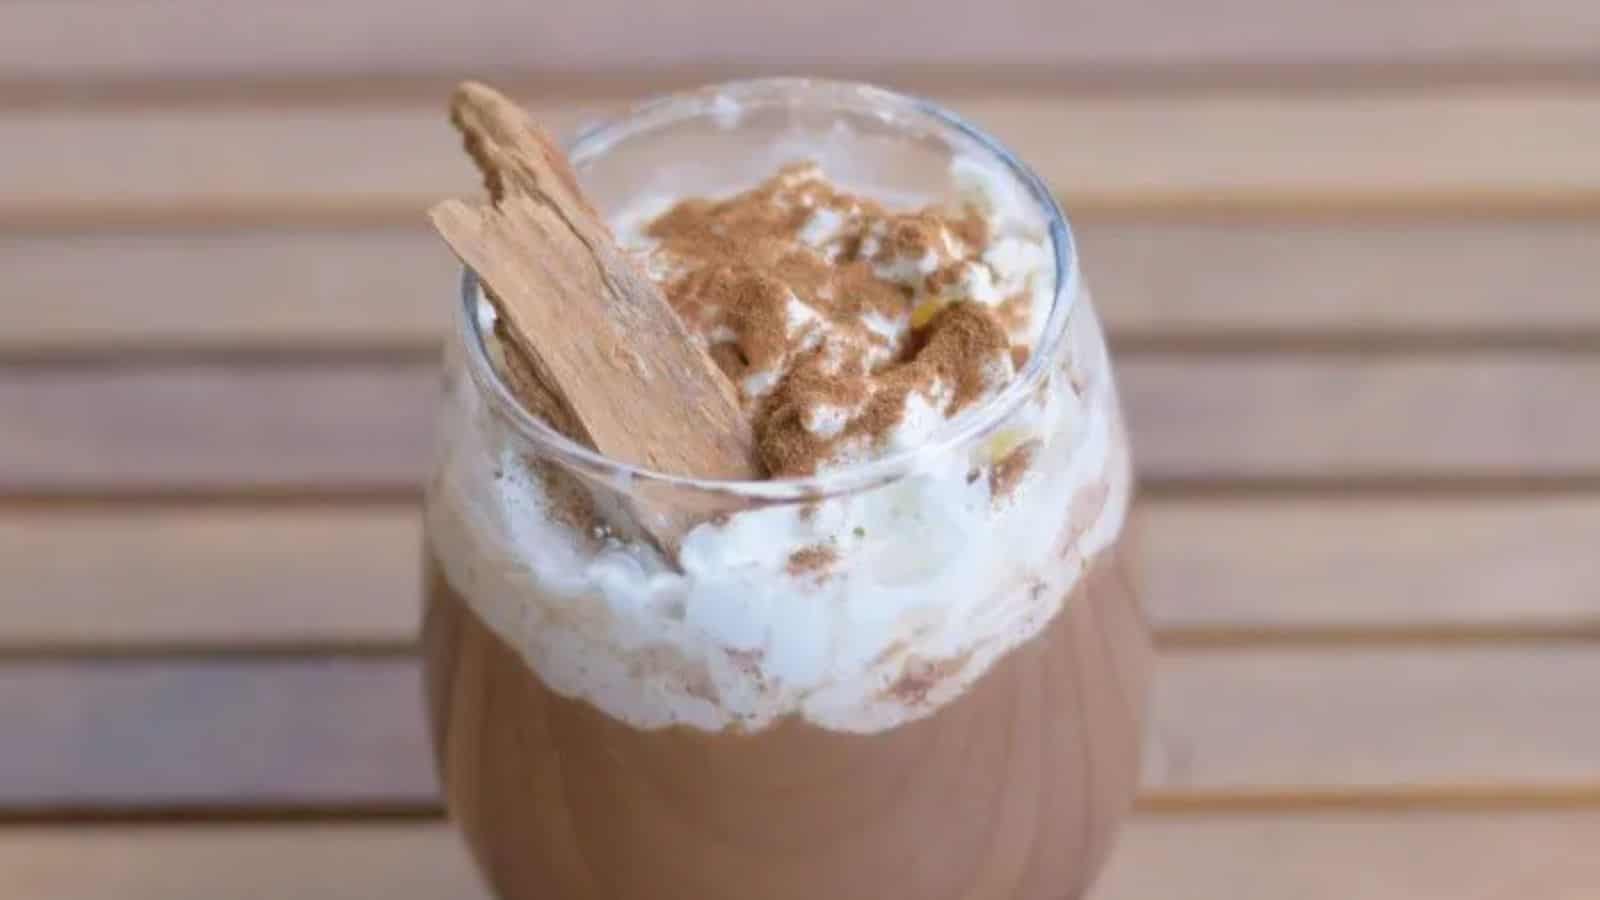 Image shows a Spicy Cinnamon Mocha in a clear glass with a cinnamon stick in the foam.